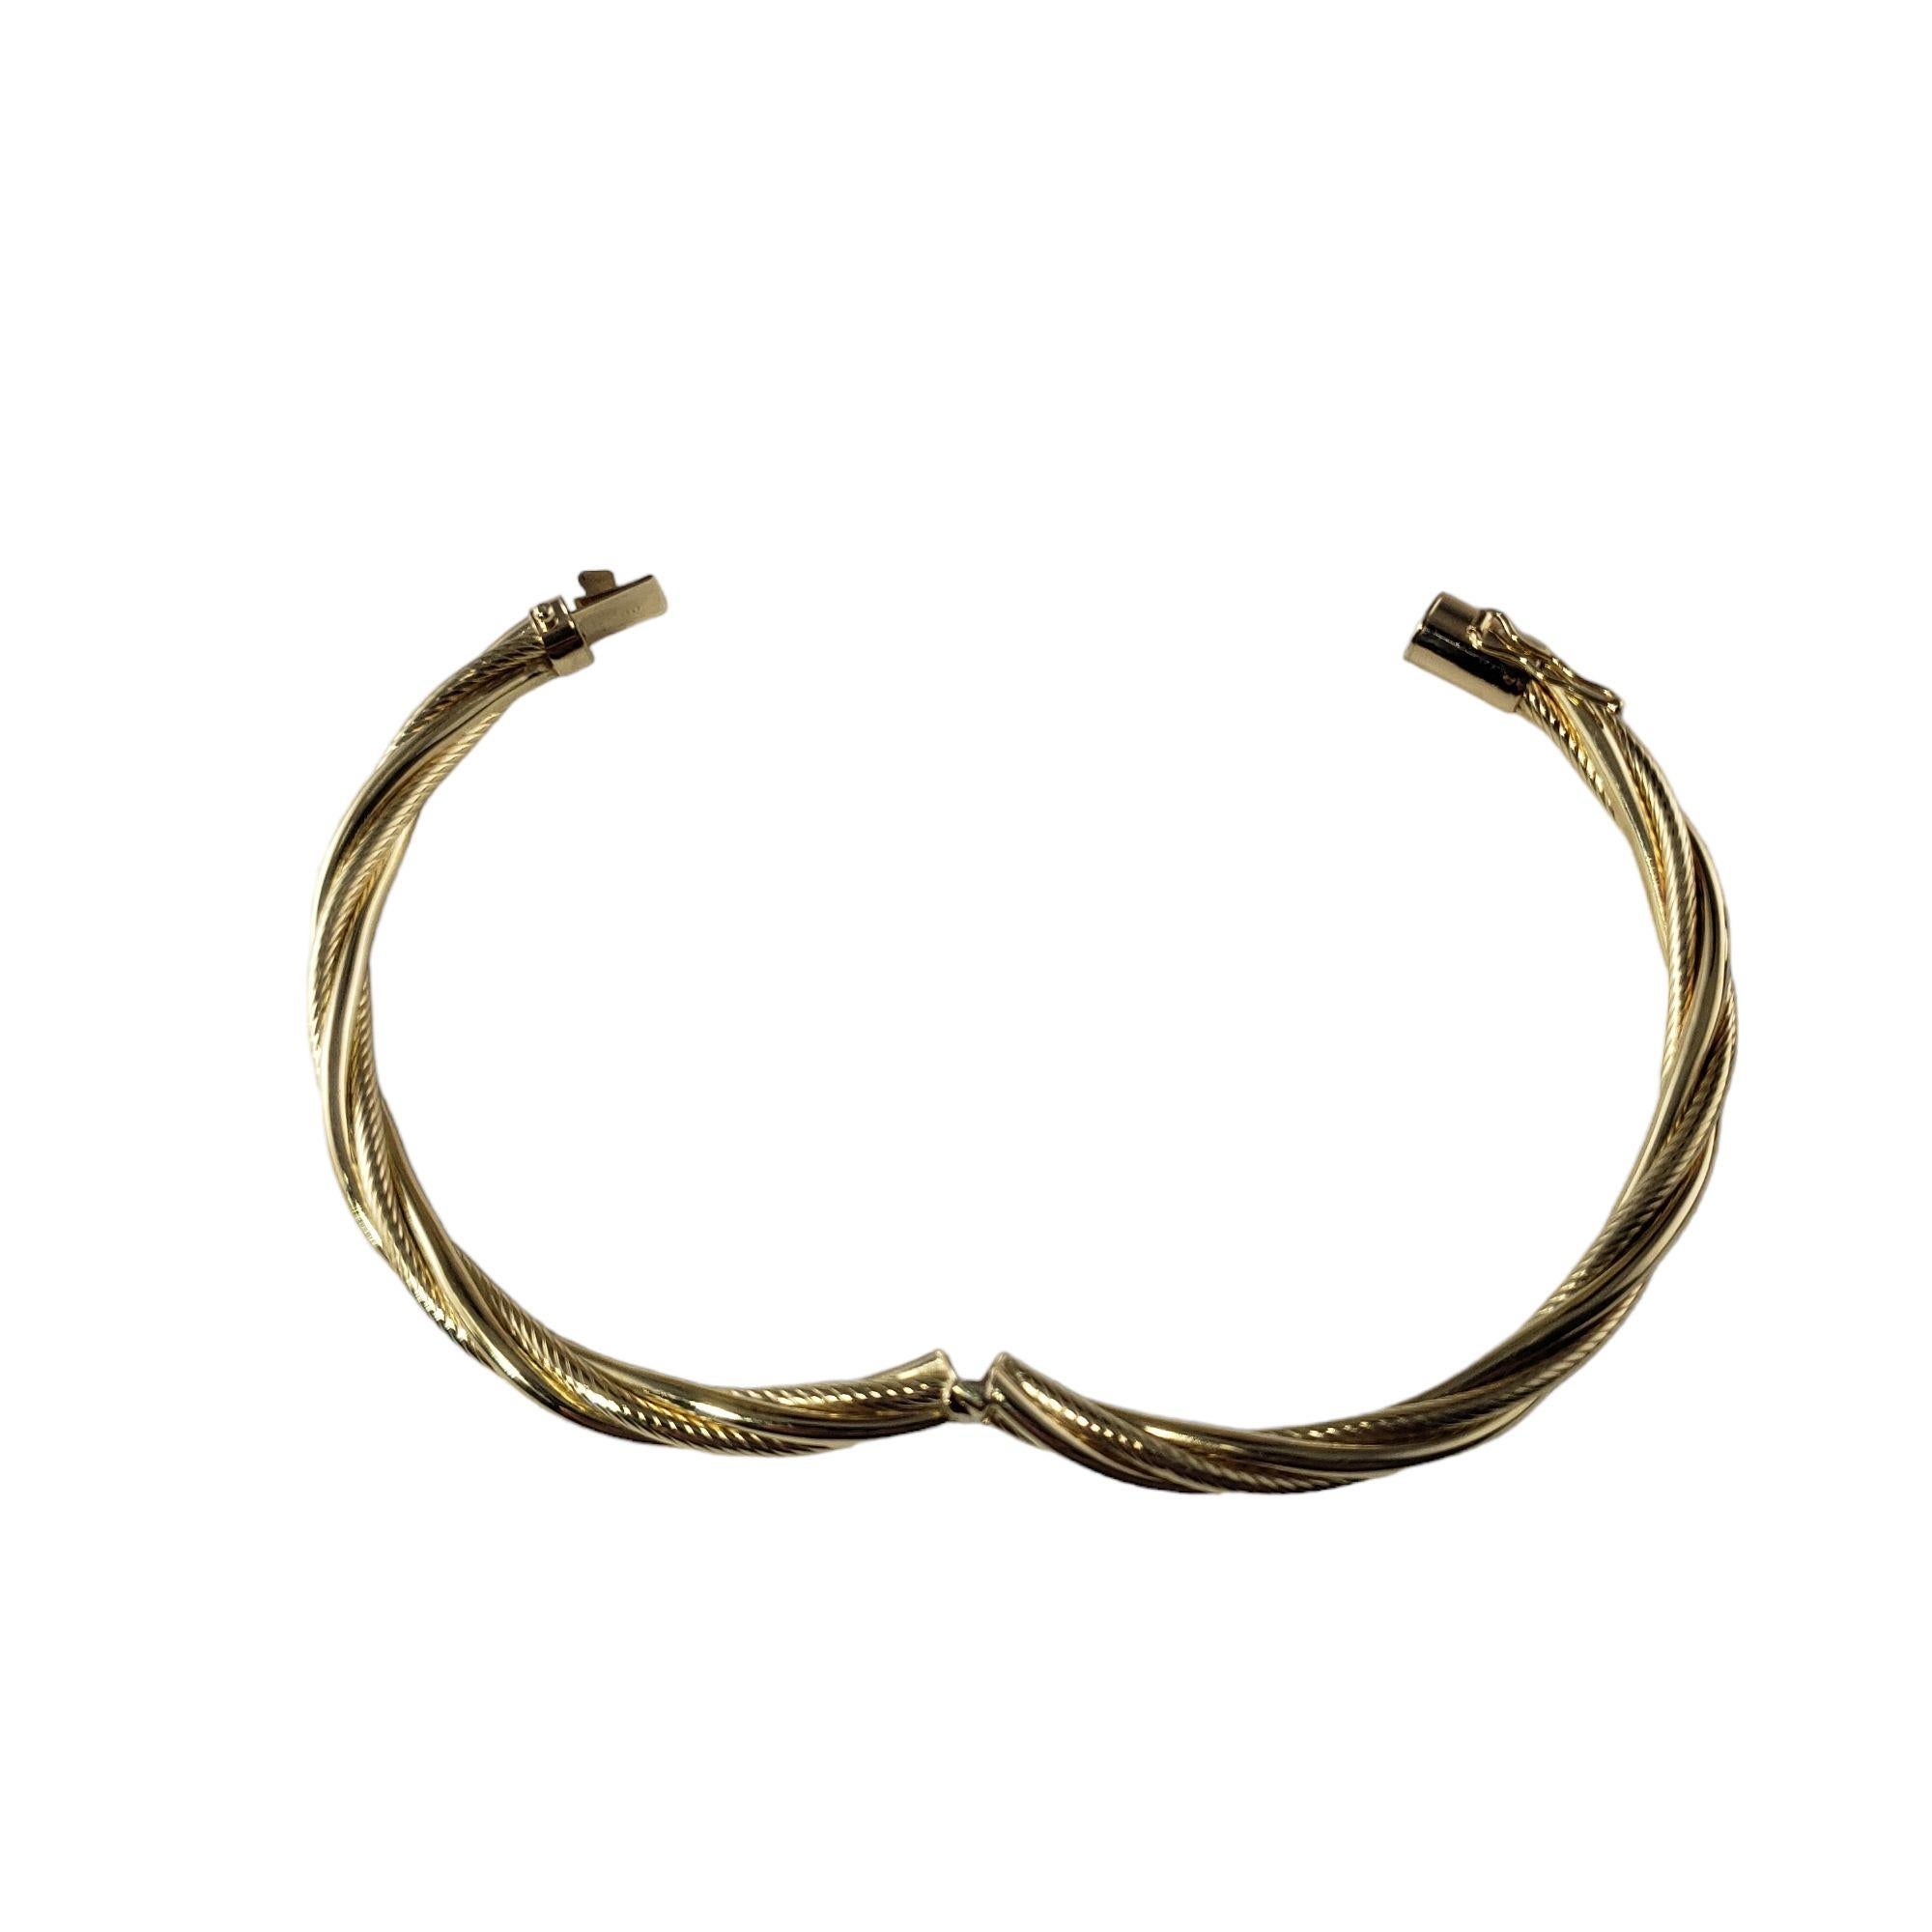 Vintage 14 Karat Yellow Gold Twist Bangle Bracelet-

This lovely hinged twist bangle bracelet is crafted in beautifully detailed 14K yellow gold. Width: 5 mm.

Size: 7 inches

Weight: 6.6 dwt. / 10.4 gr.

Stamped: 14K PAT4170809

Very good